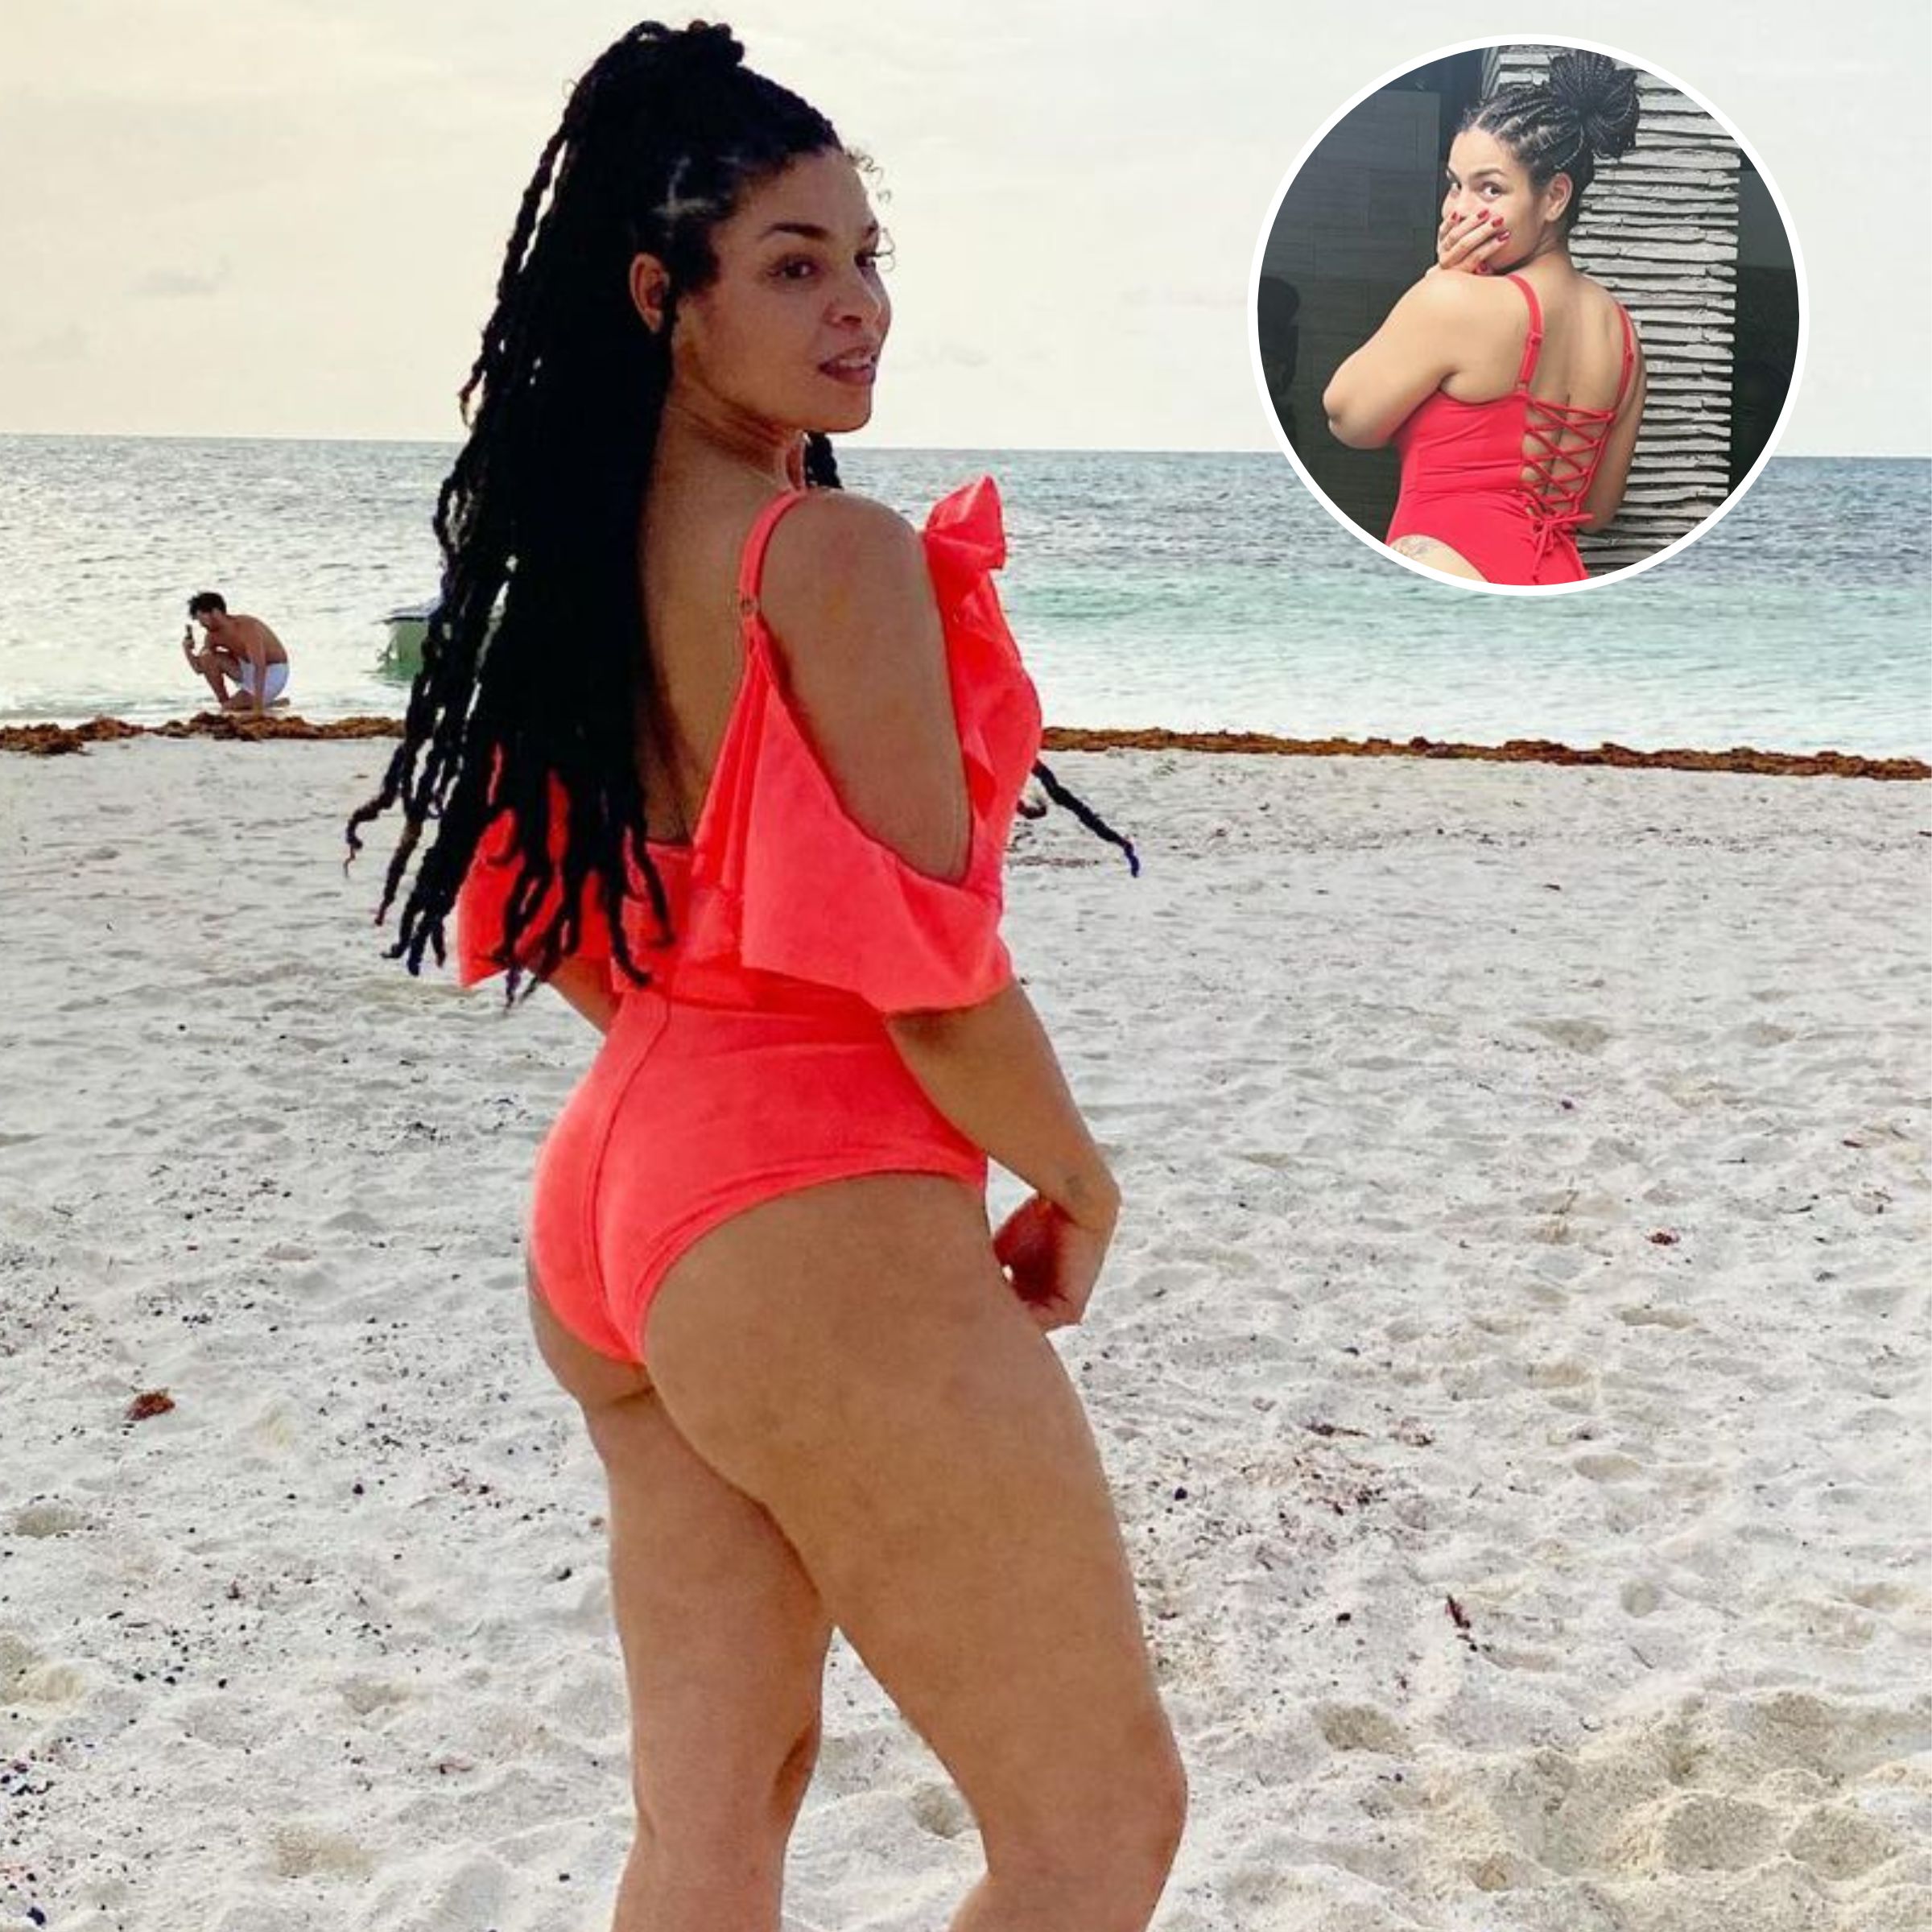 armani reyes recommends big booty in shorts pic